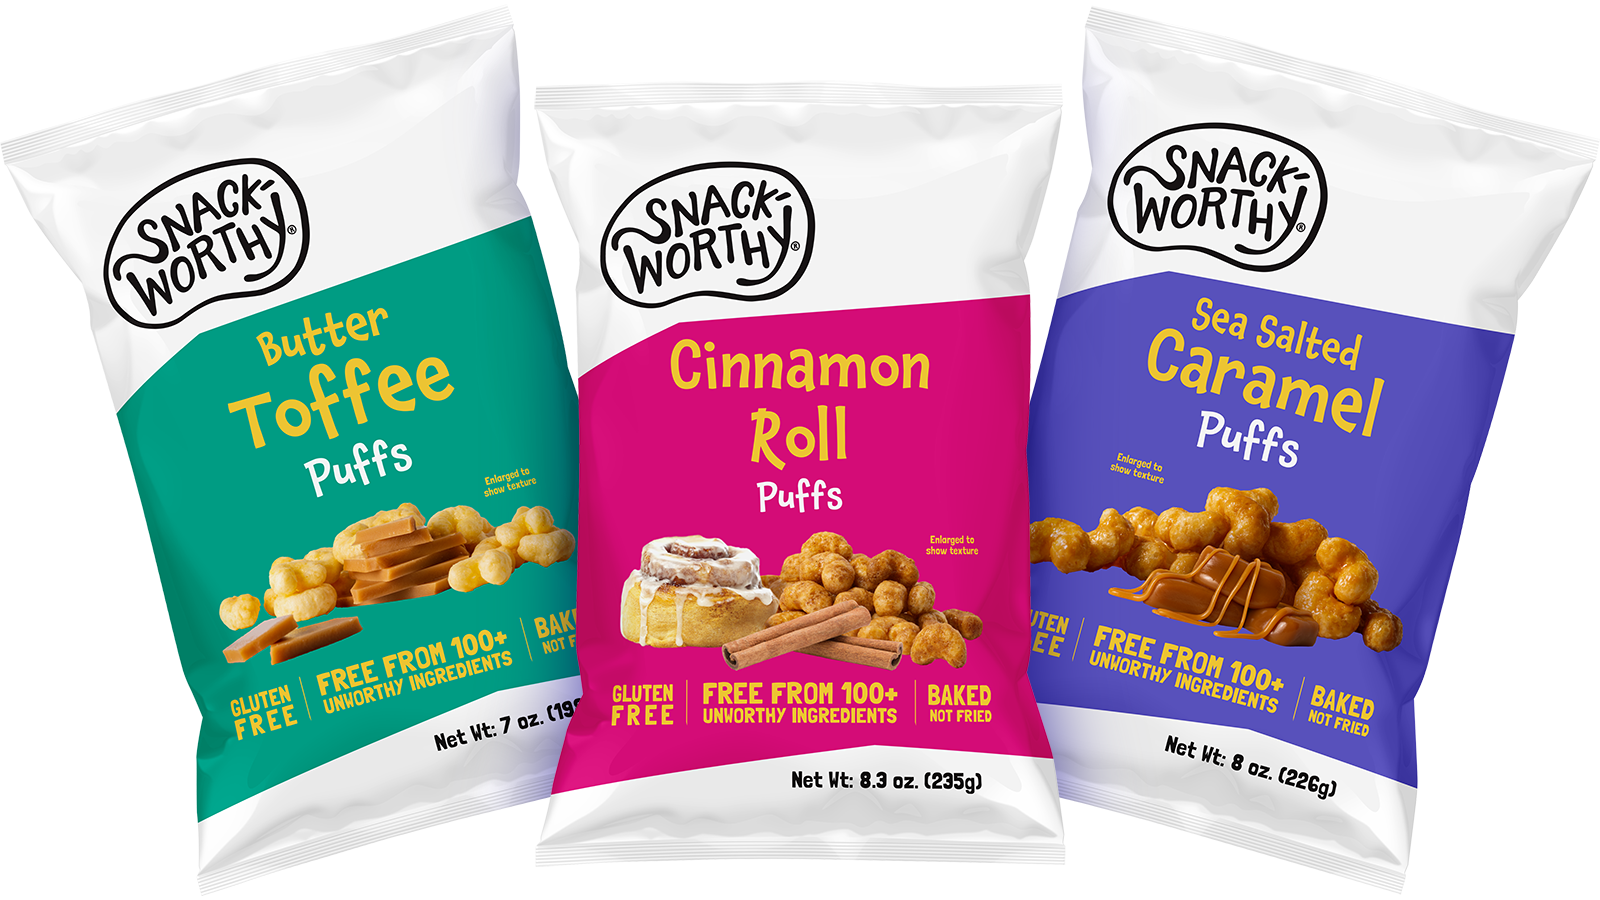 where to buy snack worthy puffs